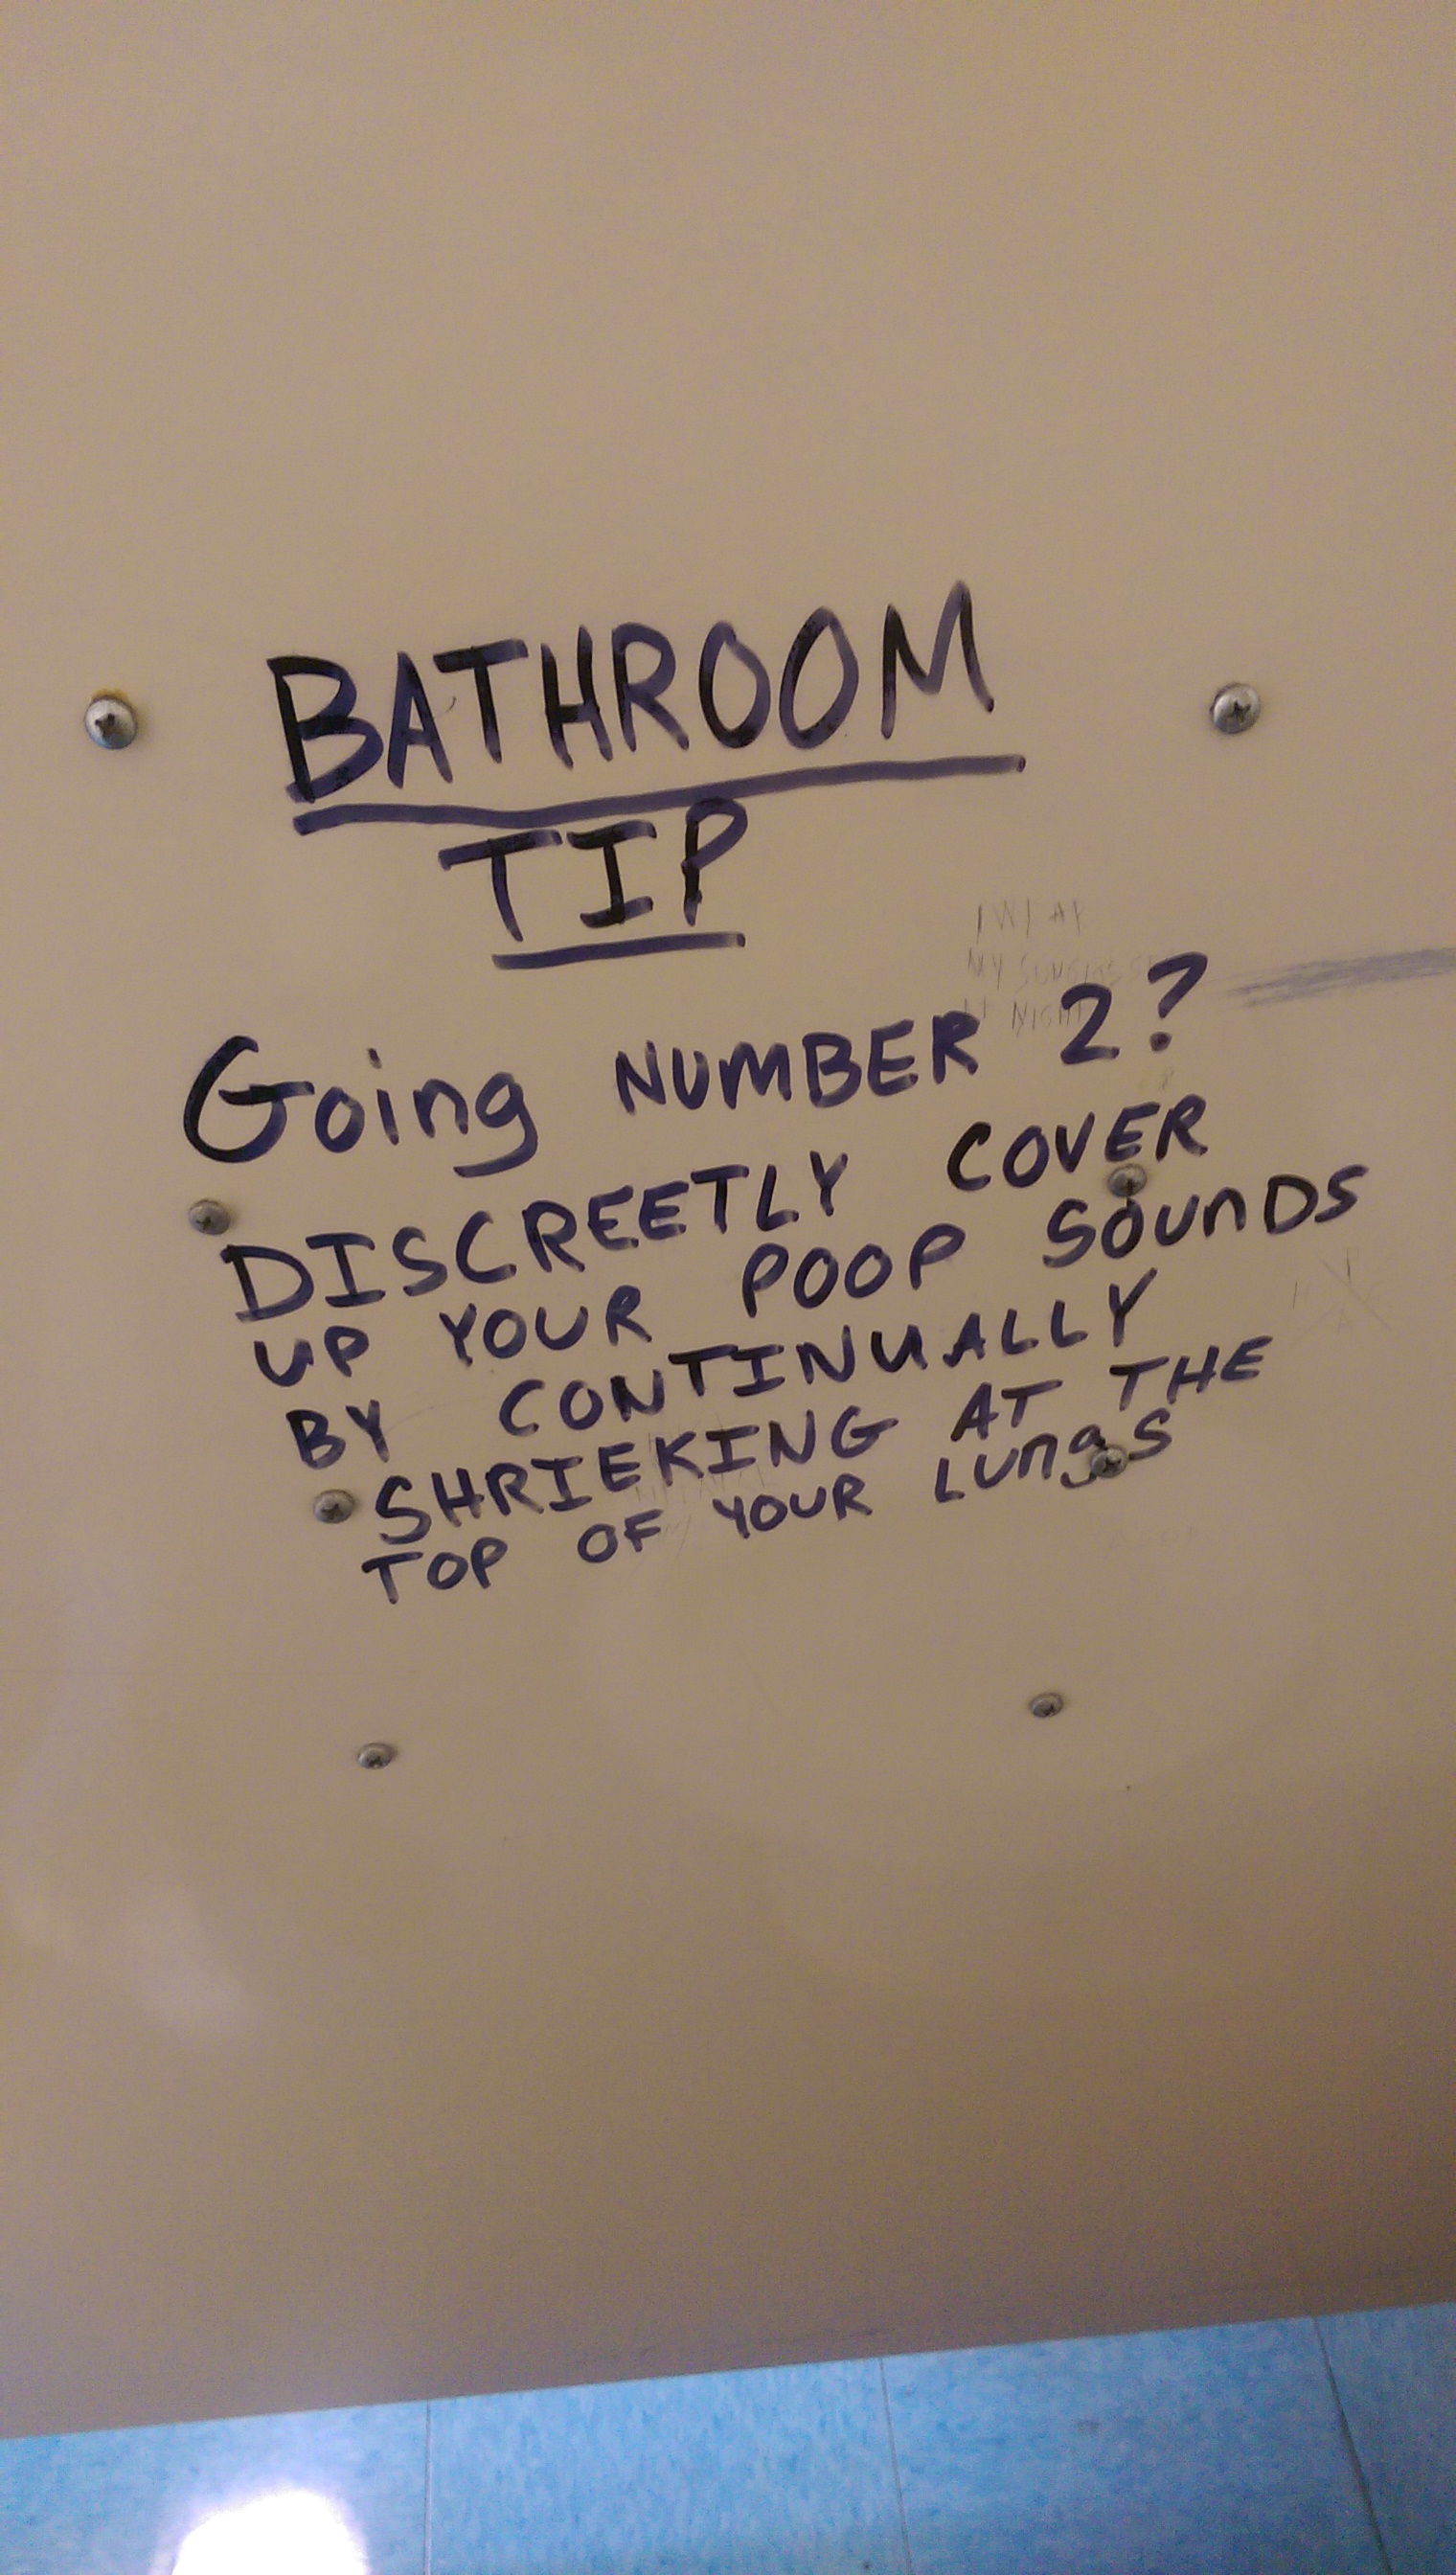 bathroom at work - Bathroom Tip Going Number 2? Discreetly Cover Up Your Poop Sounds By Continually Surie King At The Top Of Your Lunas